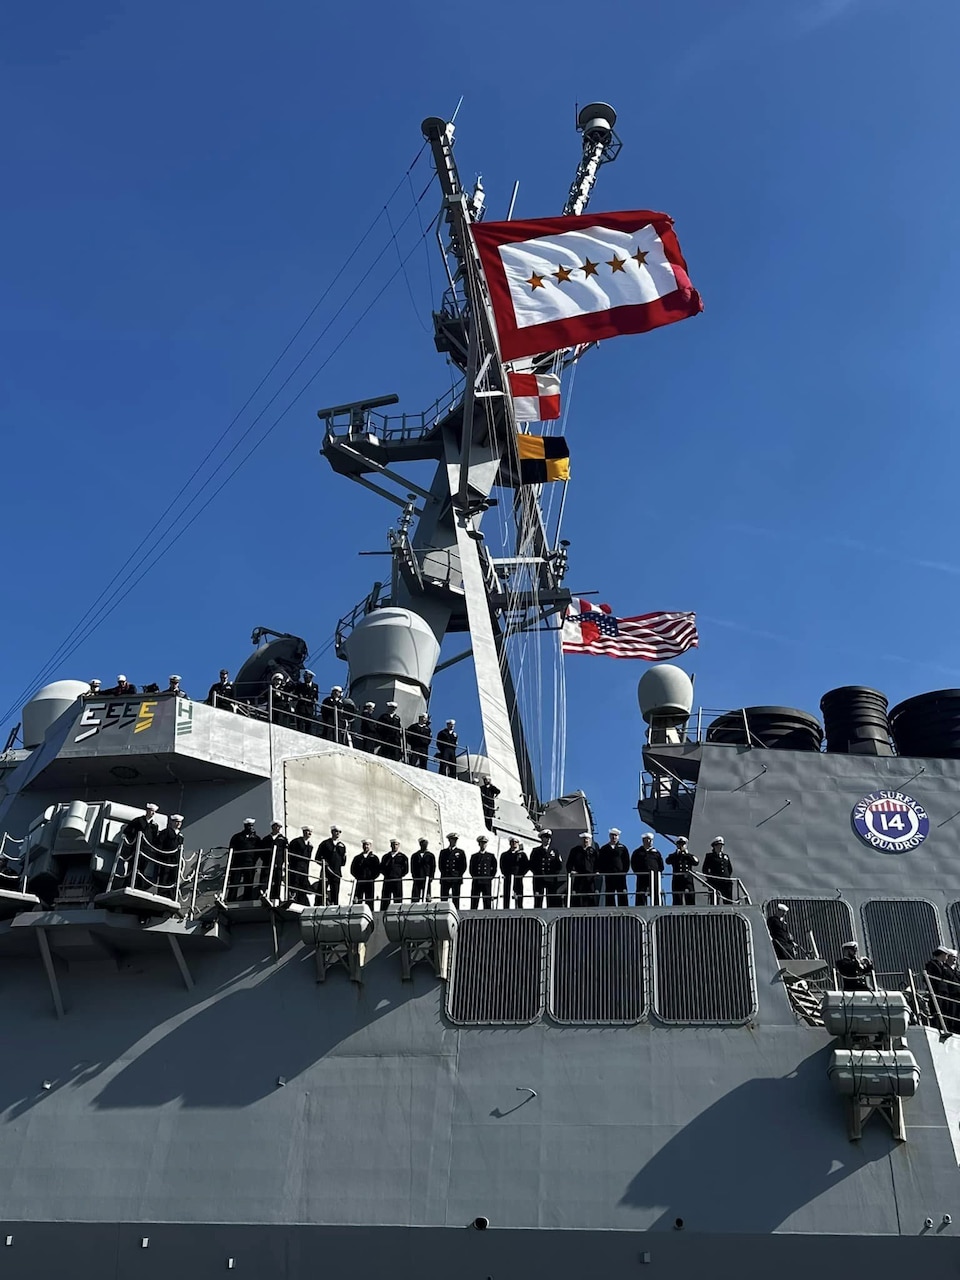 The Arleigh Burke-class guided-missile destroyer USS The Sullivans (DDG 68) returned home to Naval Station Mayport following a two-month deployment to the U.S. Naval Forces Europe area of operations, Feb. 3. U.S. 2nd Fleet, reestablished in 2018 in response to the changing global security environment, develops and employs maritime forces ready to fight across multiple domains in the Atlantic and Arctic in order to ensure access, deter aggression and defend U.S., allied, and partner interests. (U.S. Navy courtesy photo)